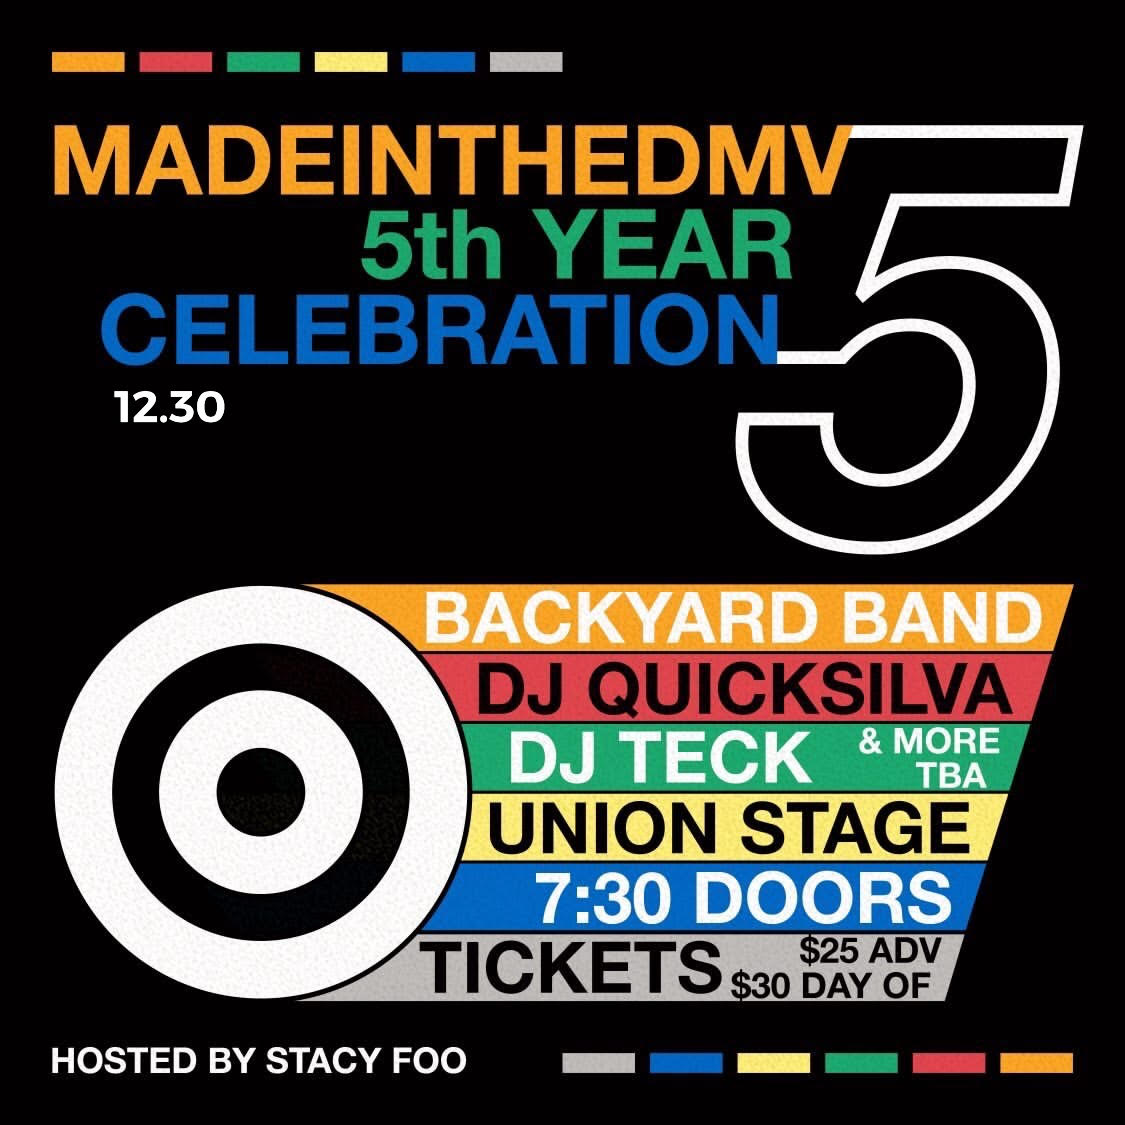 WE TURN 5. COME CELEBRATE WITH US